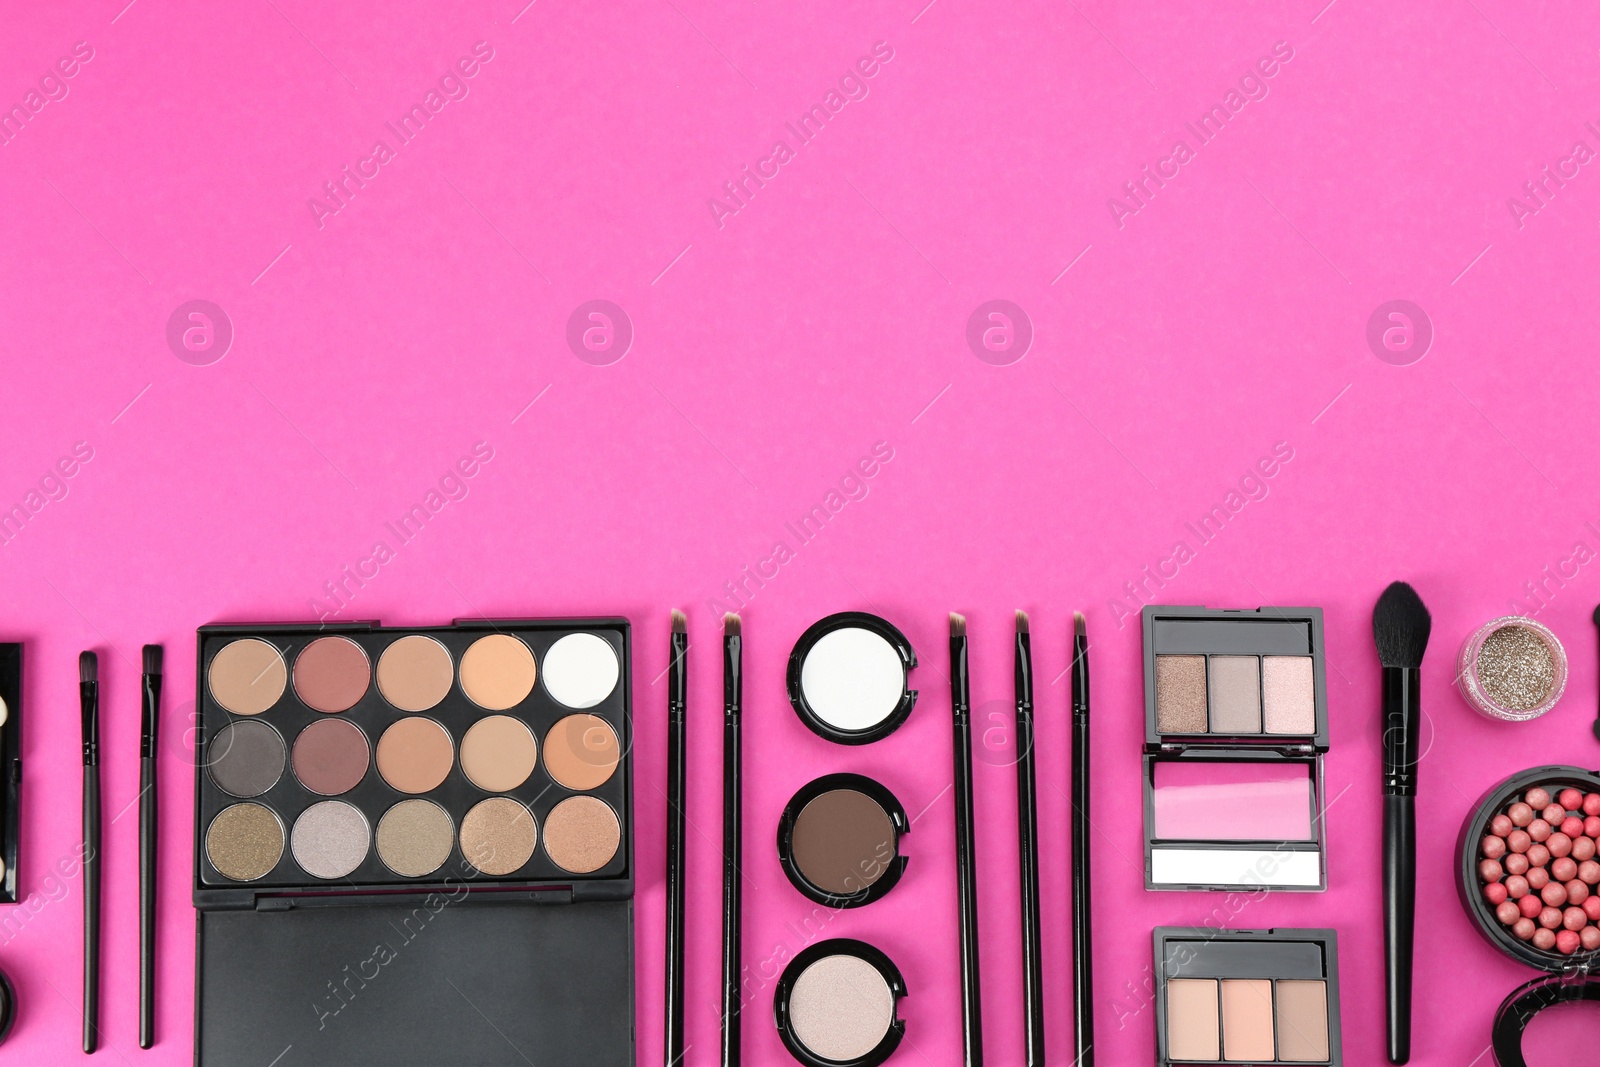 Photo of Flat lay composition with makeup brushes on bright pink background, space for text